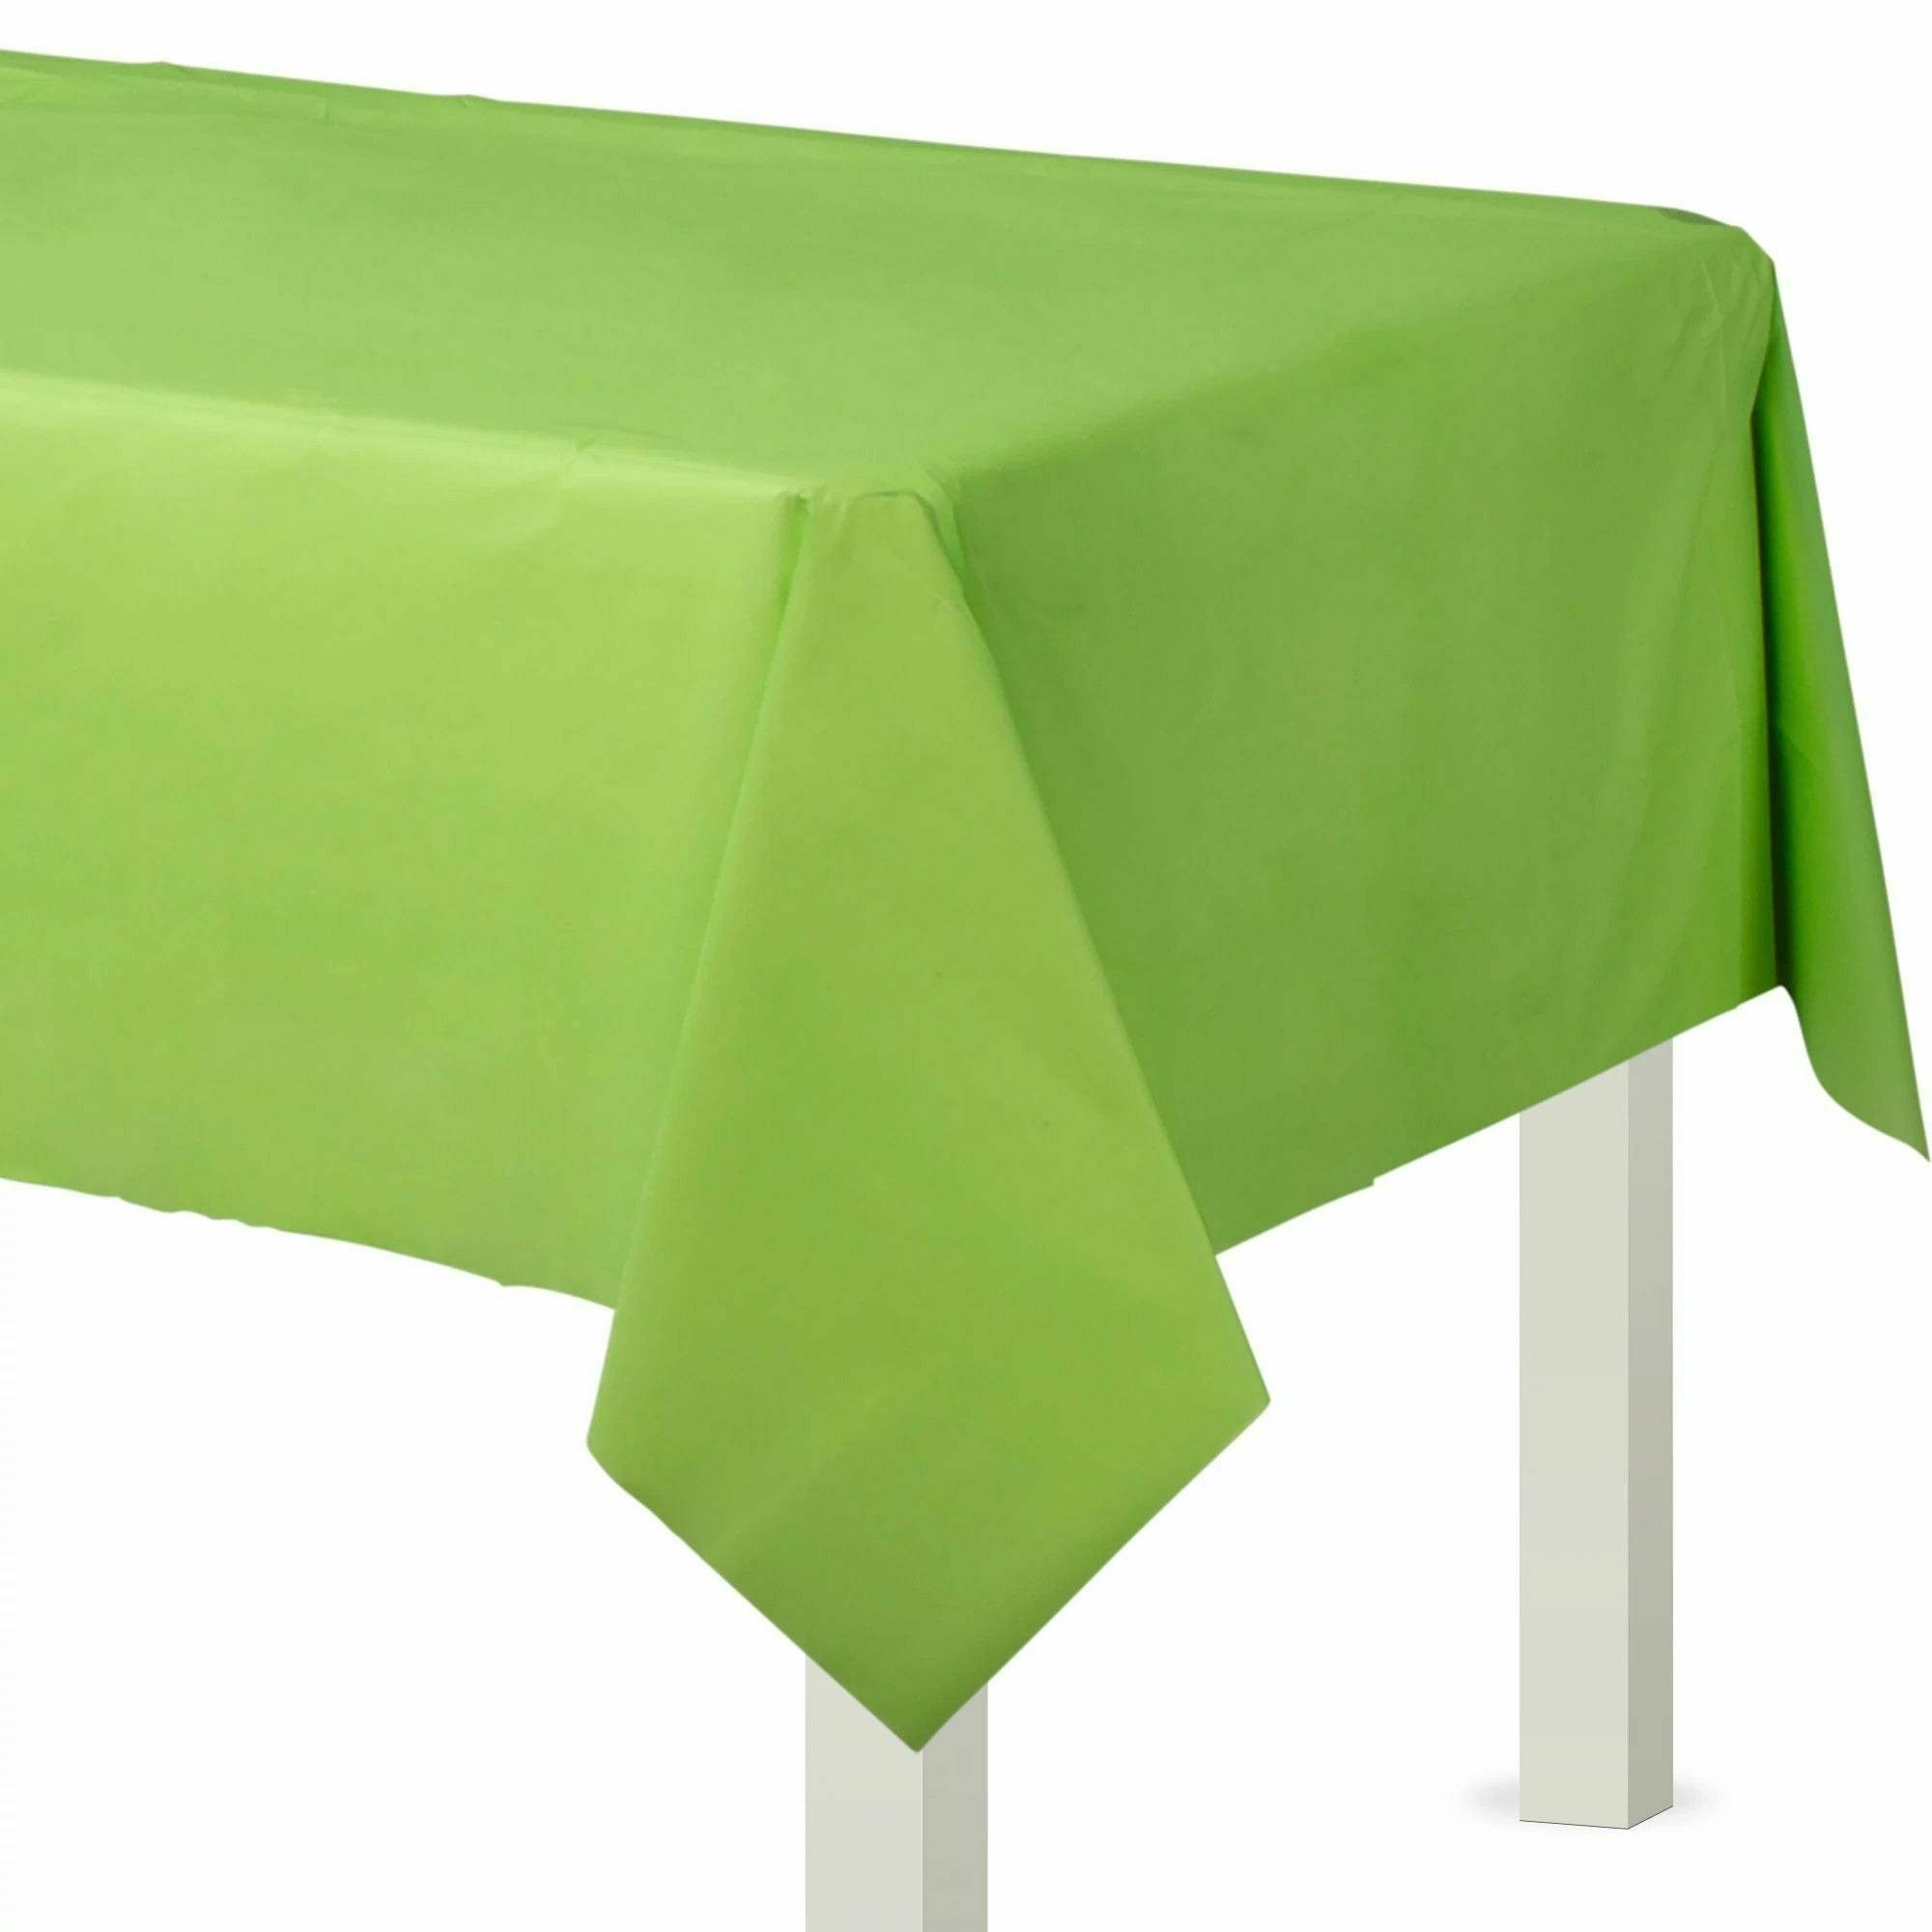 Amscan BASIC Kiwi - Flannel Backed Table Cover